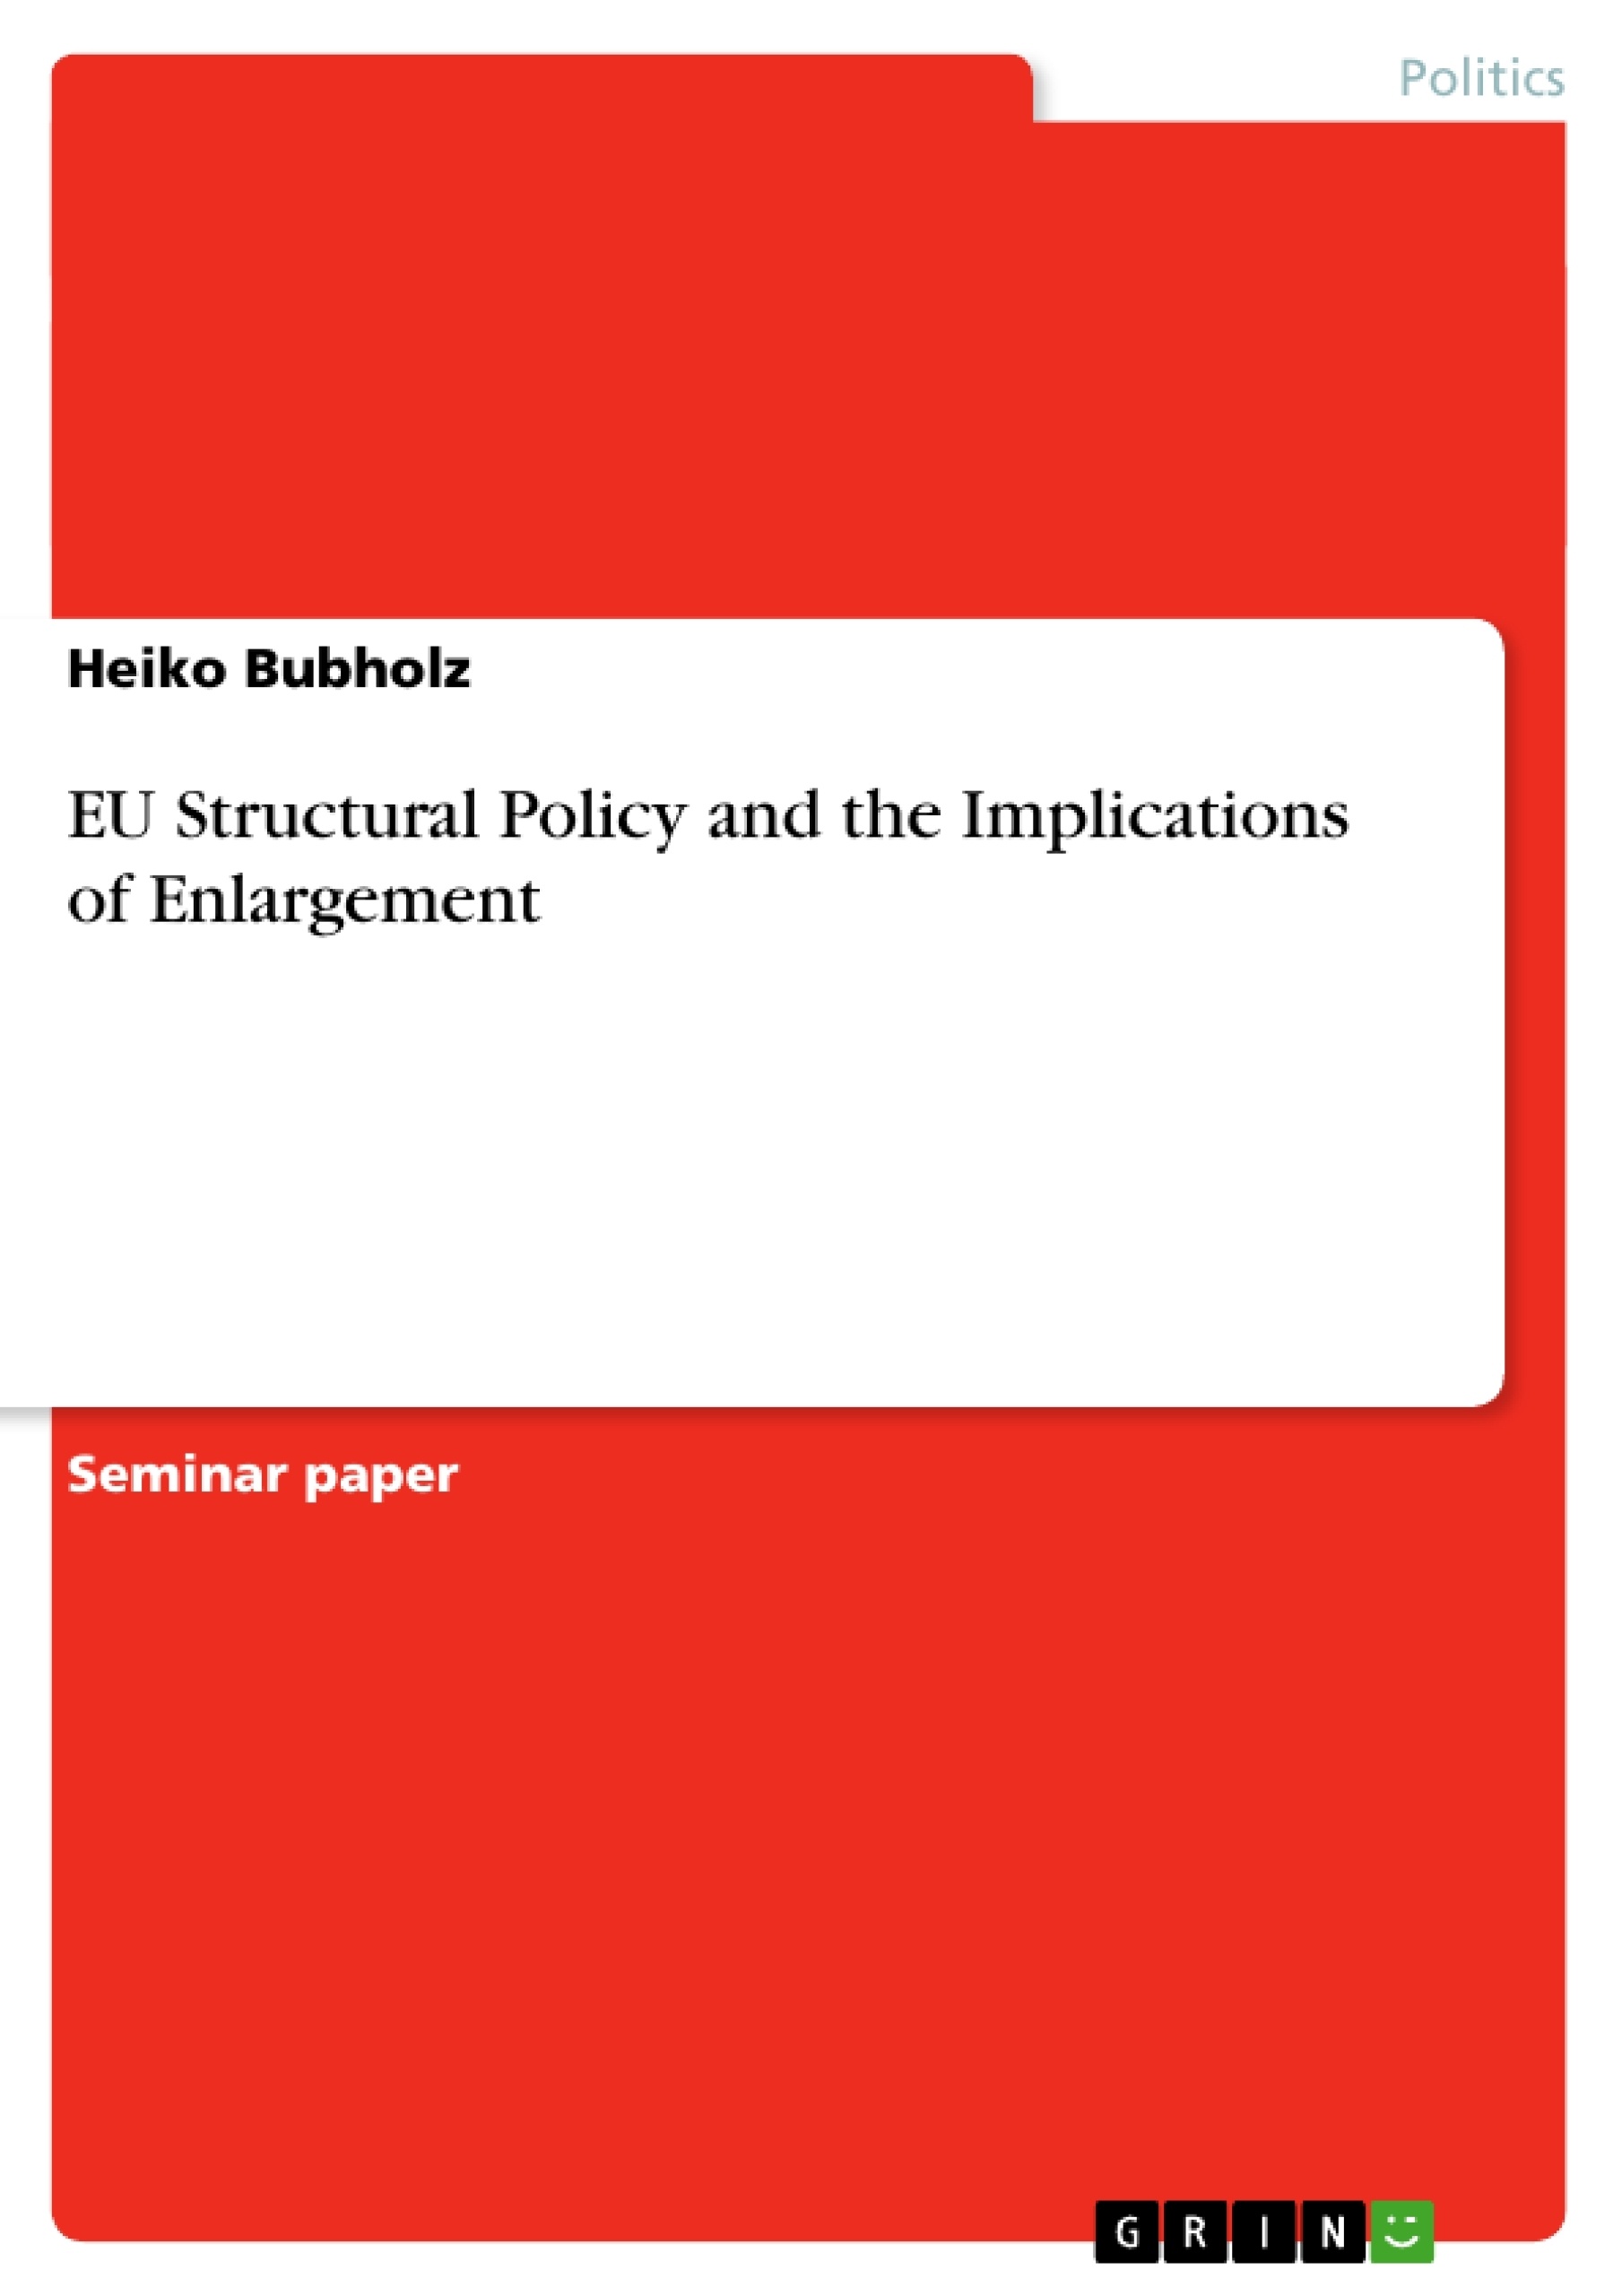 Title: EU Structural Policy and the Implications of Enlargement